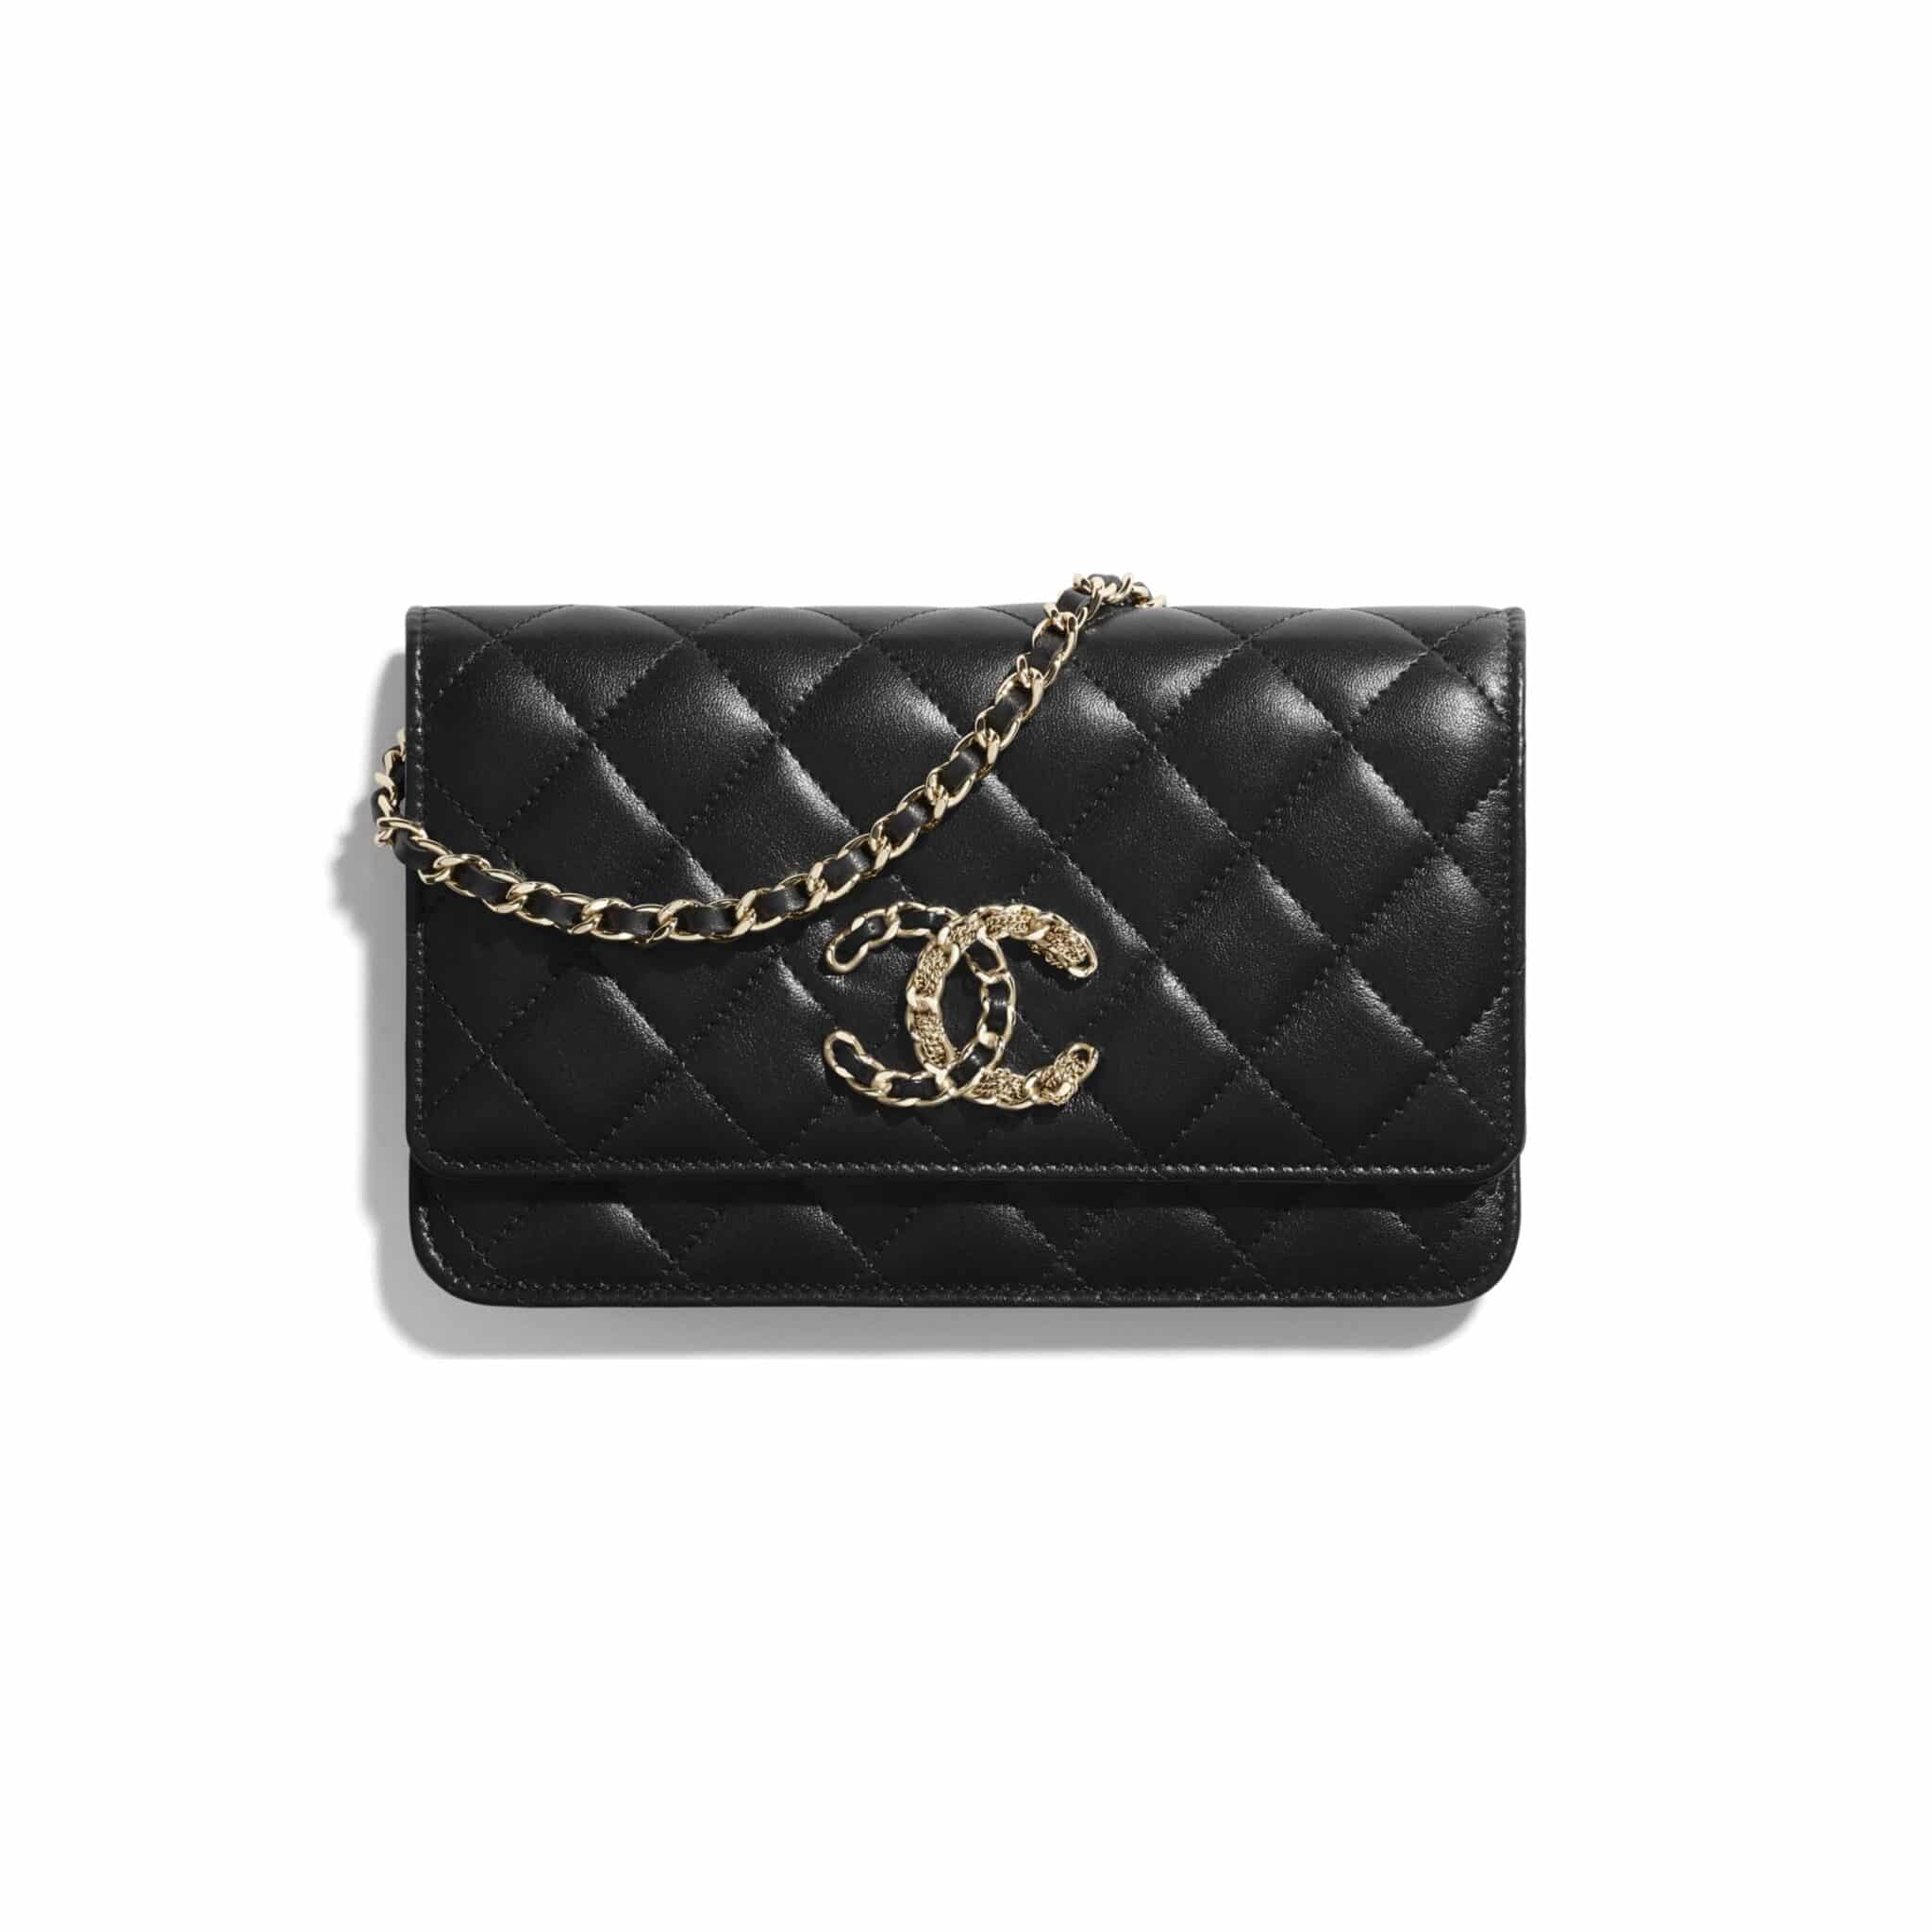 Chanel 2020 CC Lanyard Leather Pouch - Black Wallets, Accessories